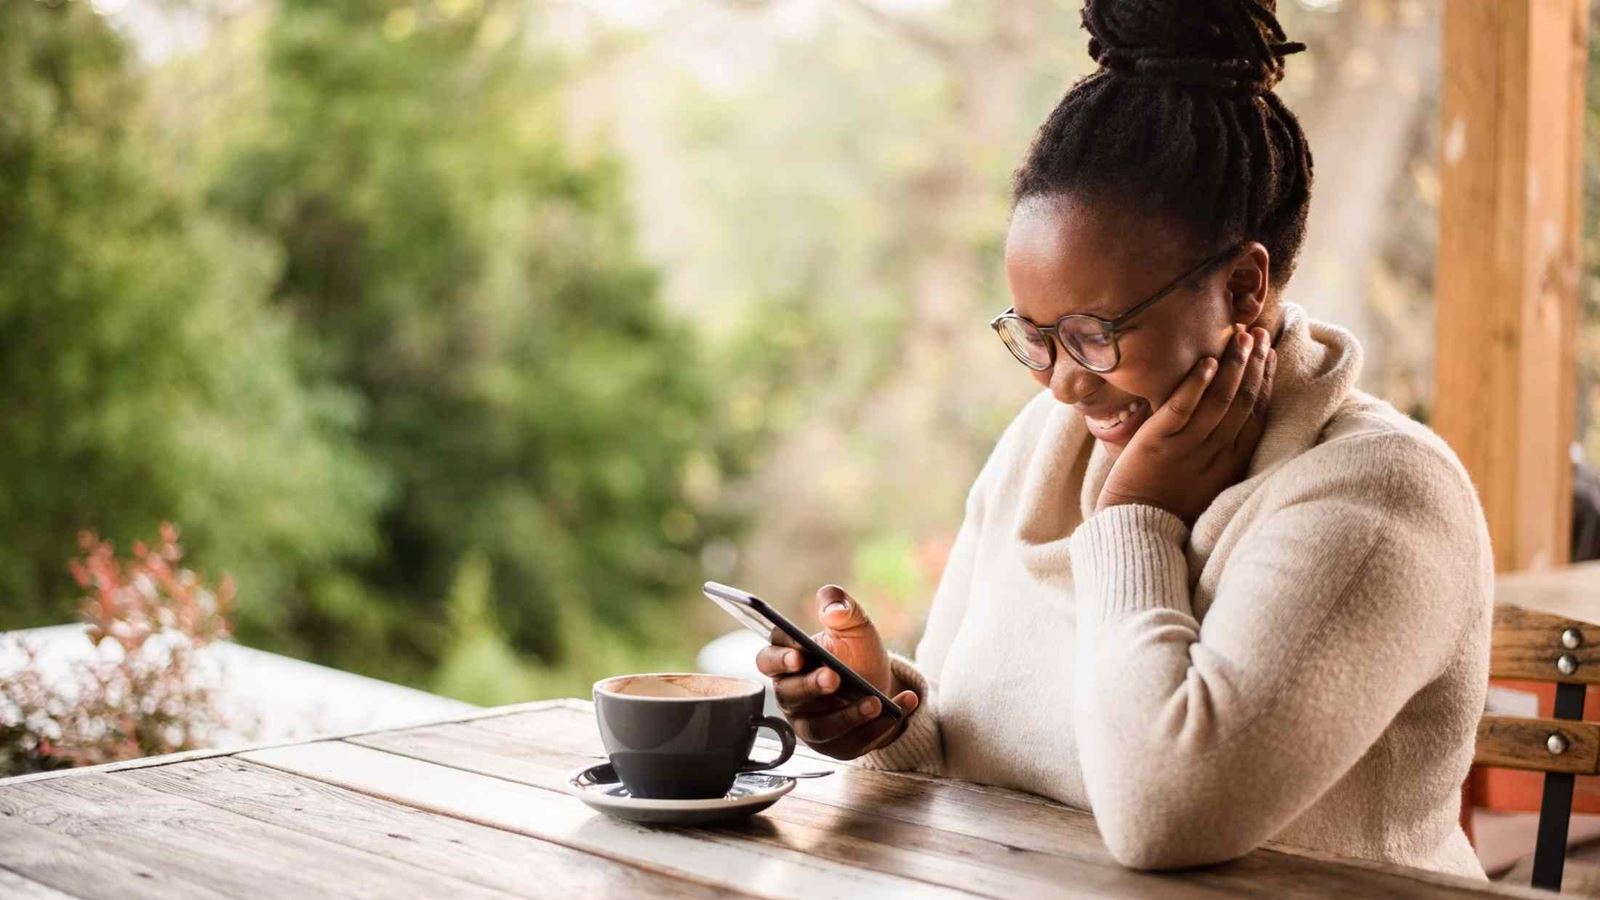 Young black woman reading message on mobile phone and smiling while sitting